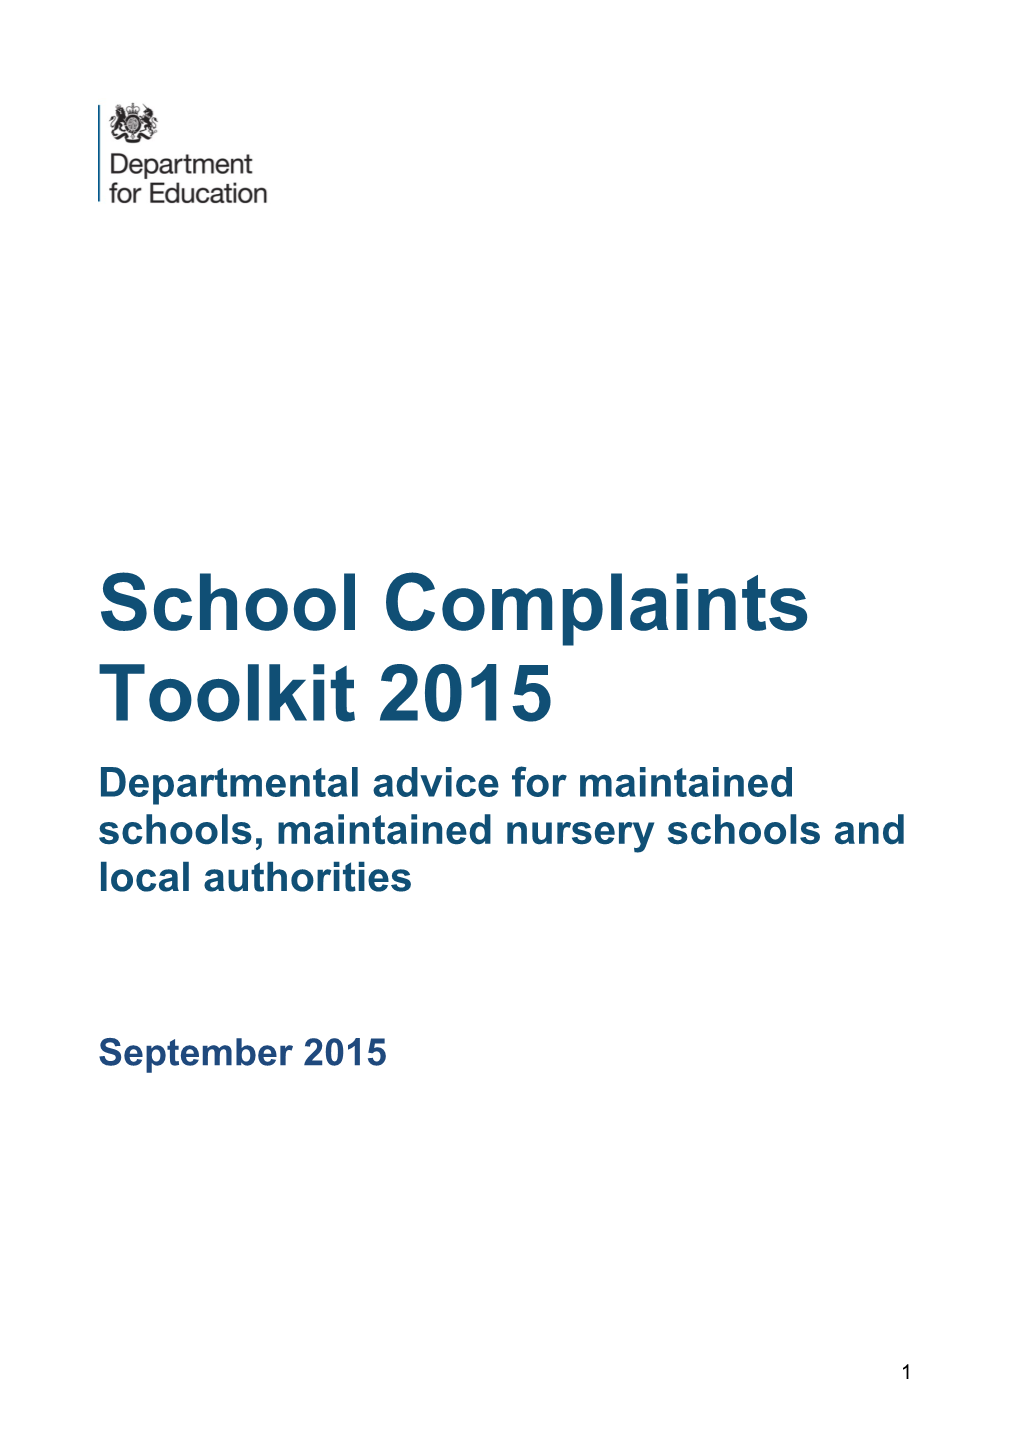 Departmental Advice for Maintained Schools, Maintained Nursery Schools Andlocal Authorities